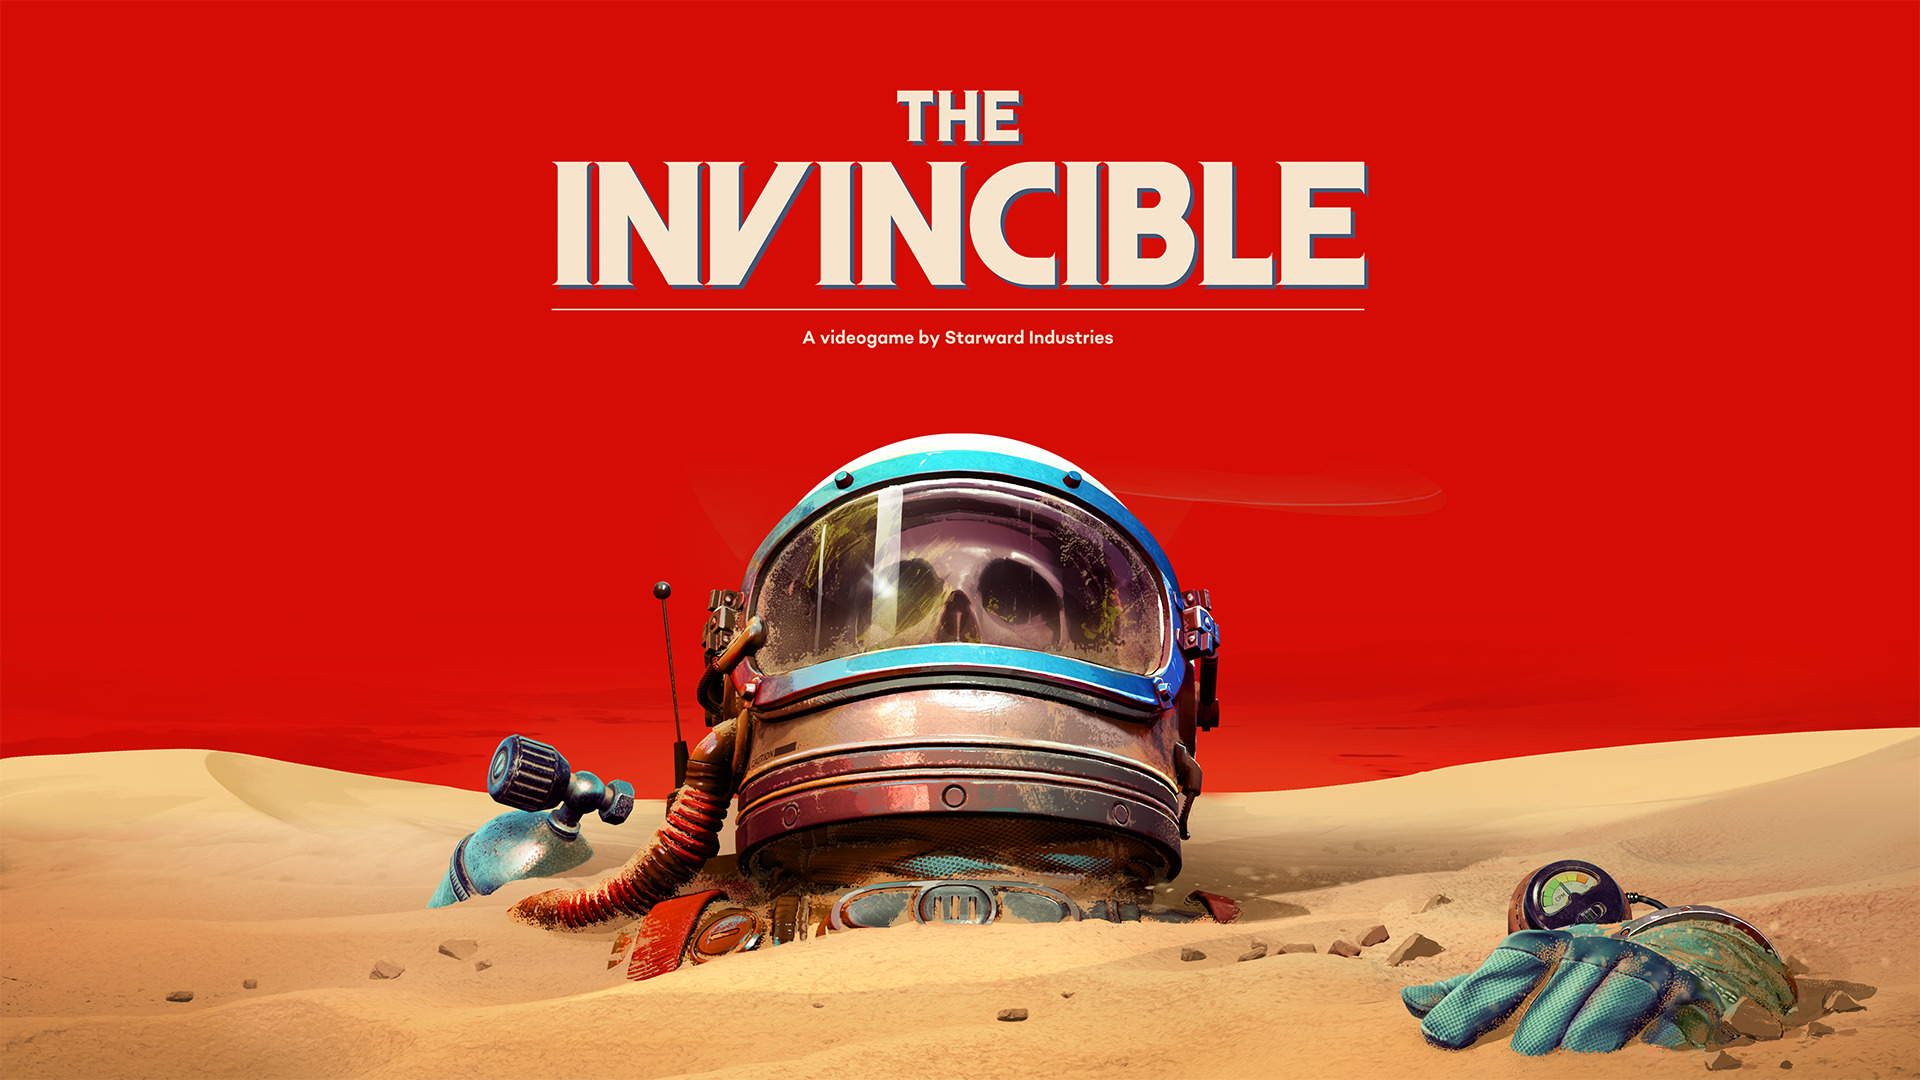 The invincible is a sci